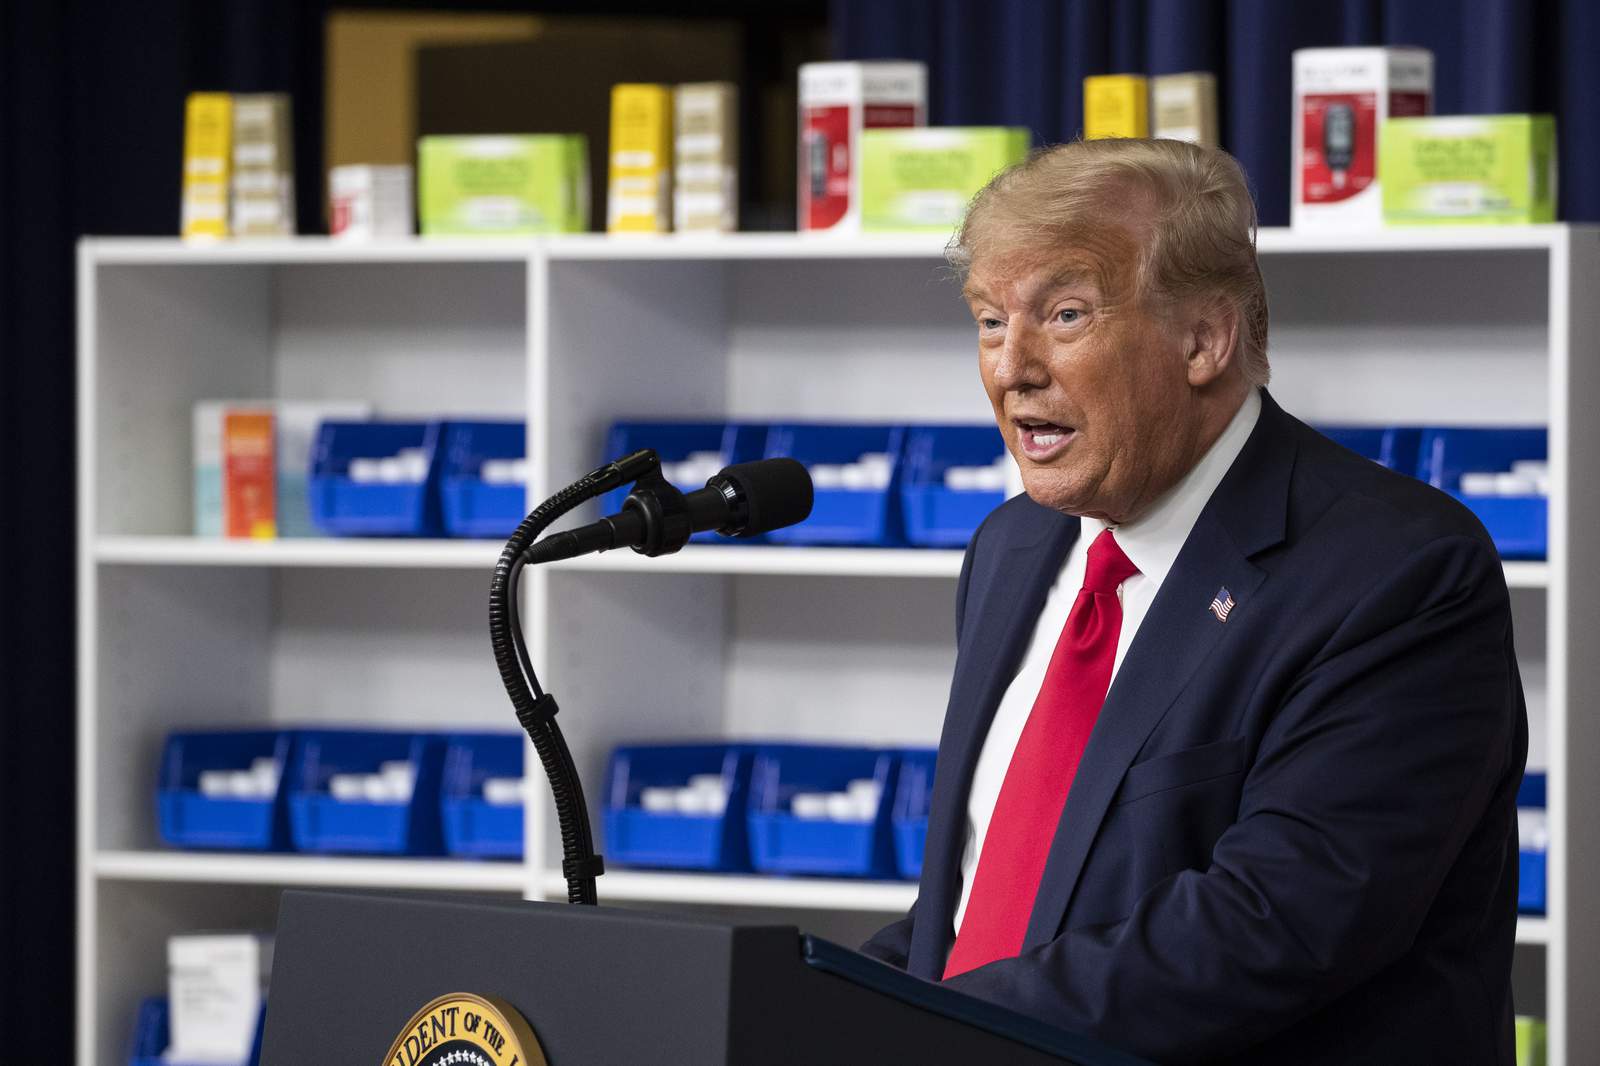 With no new law to curb drug costs, Trump tries own changes